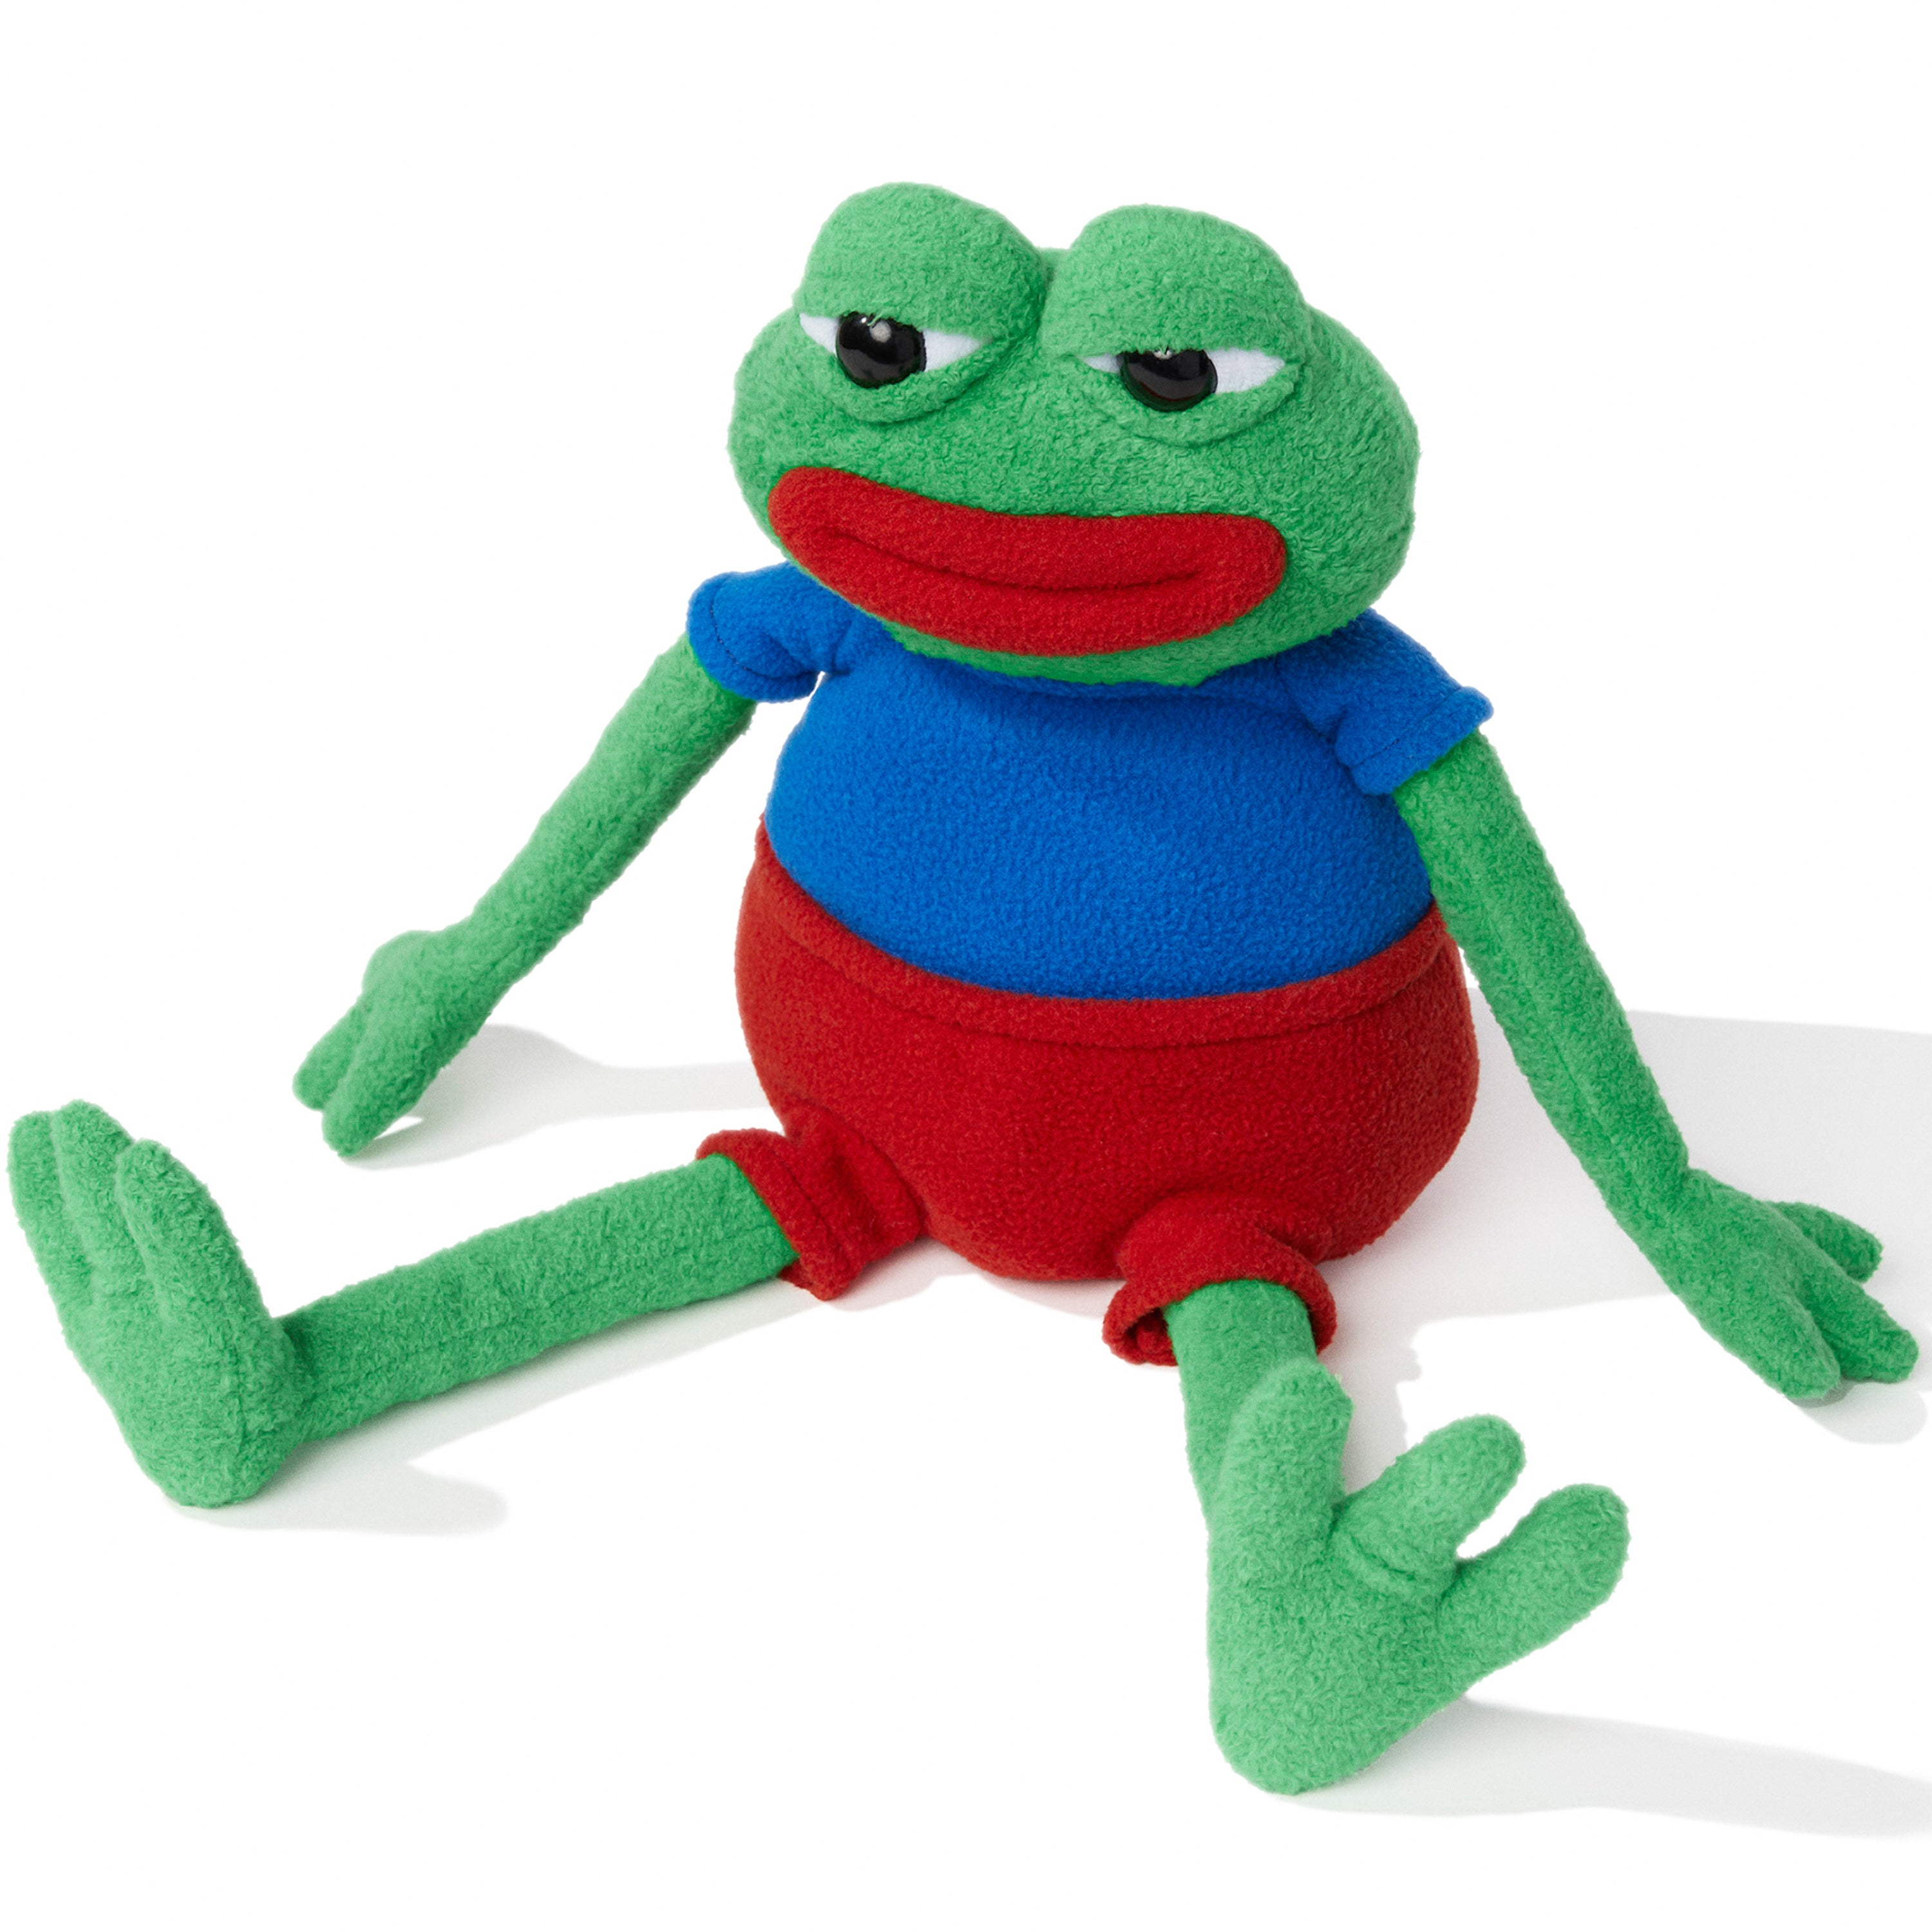 Hashtag Collectibles Pepe The Frog - The Official Plush Doll (Anatomically Correct)